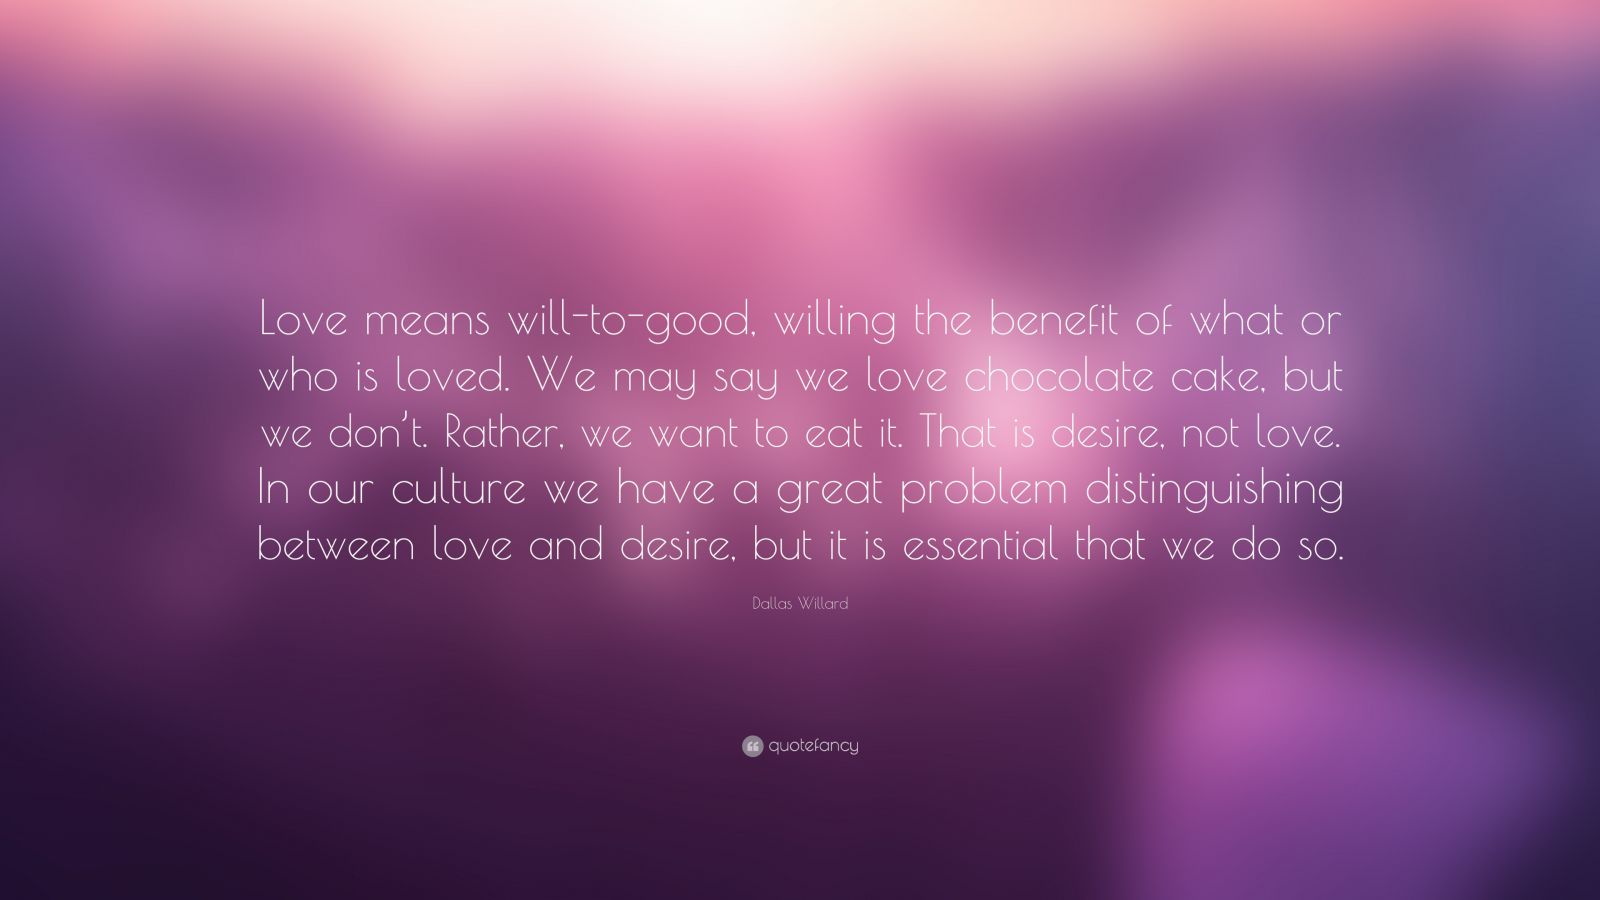 Dallas Willard Quote: “Love means will-to-good, willing the benefit of ...